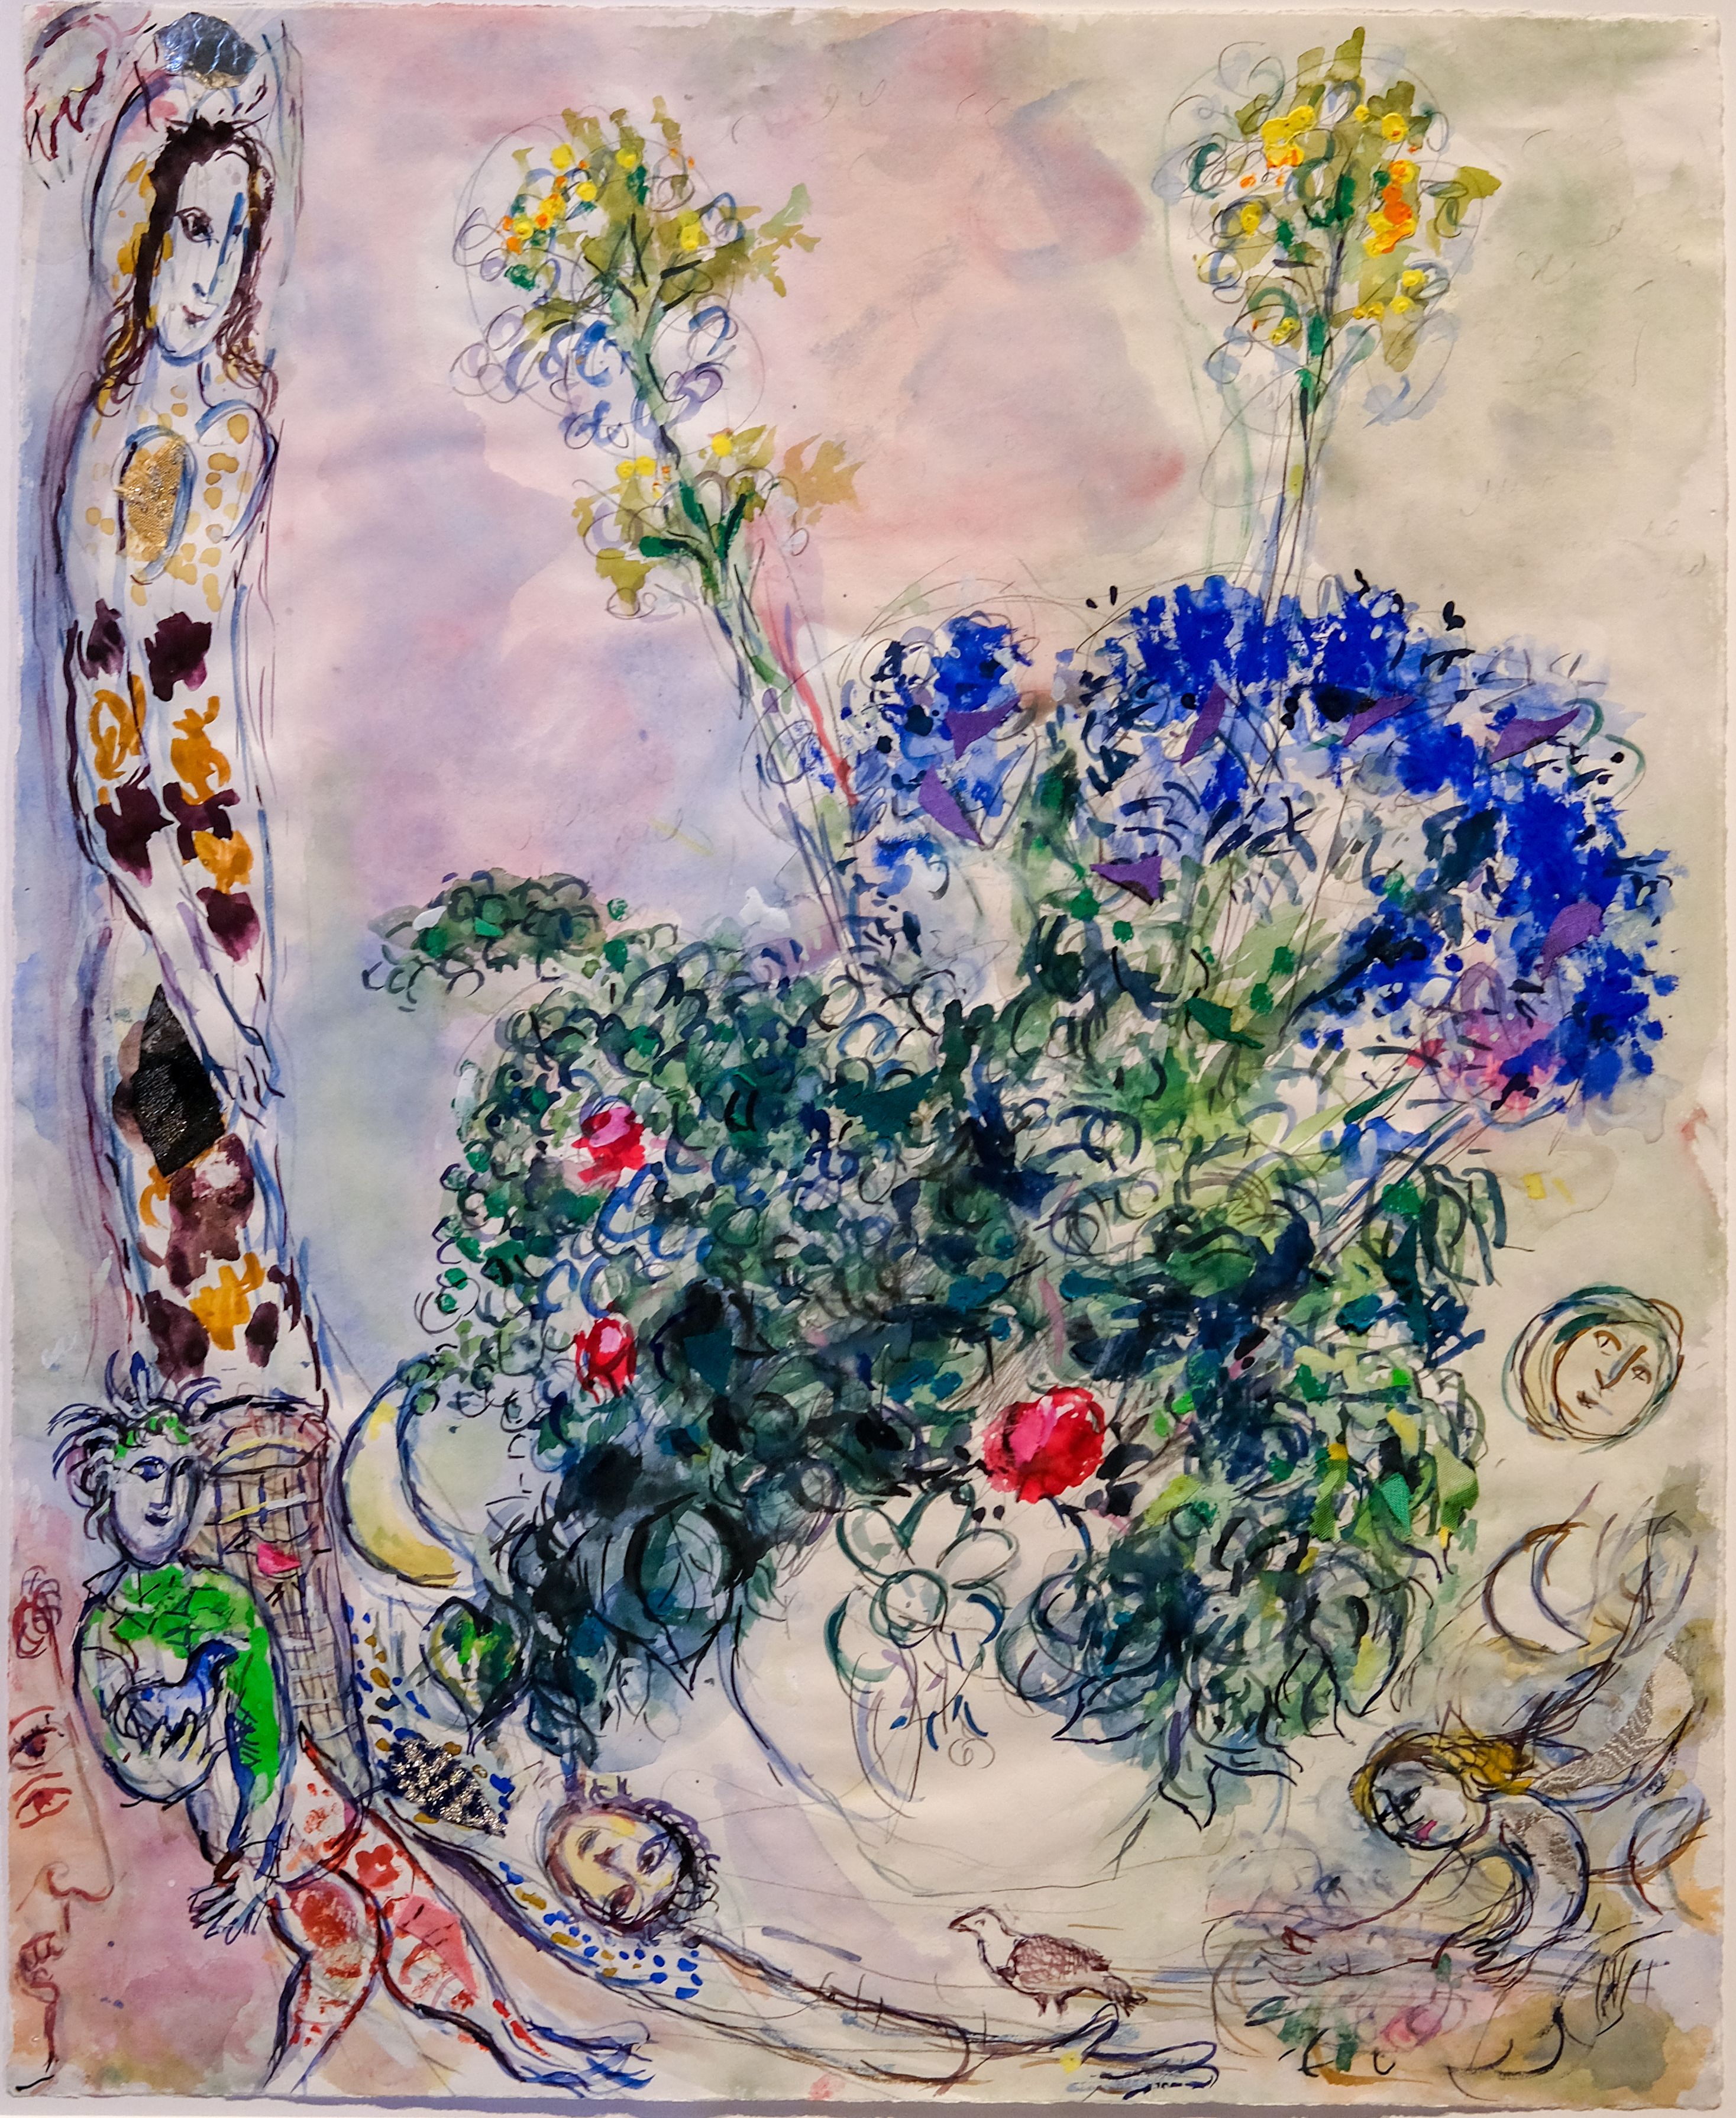 Variation on Theme of Magic Flute - Chagall